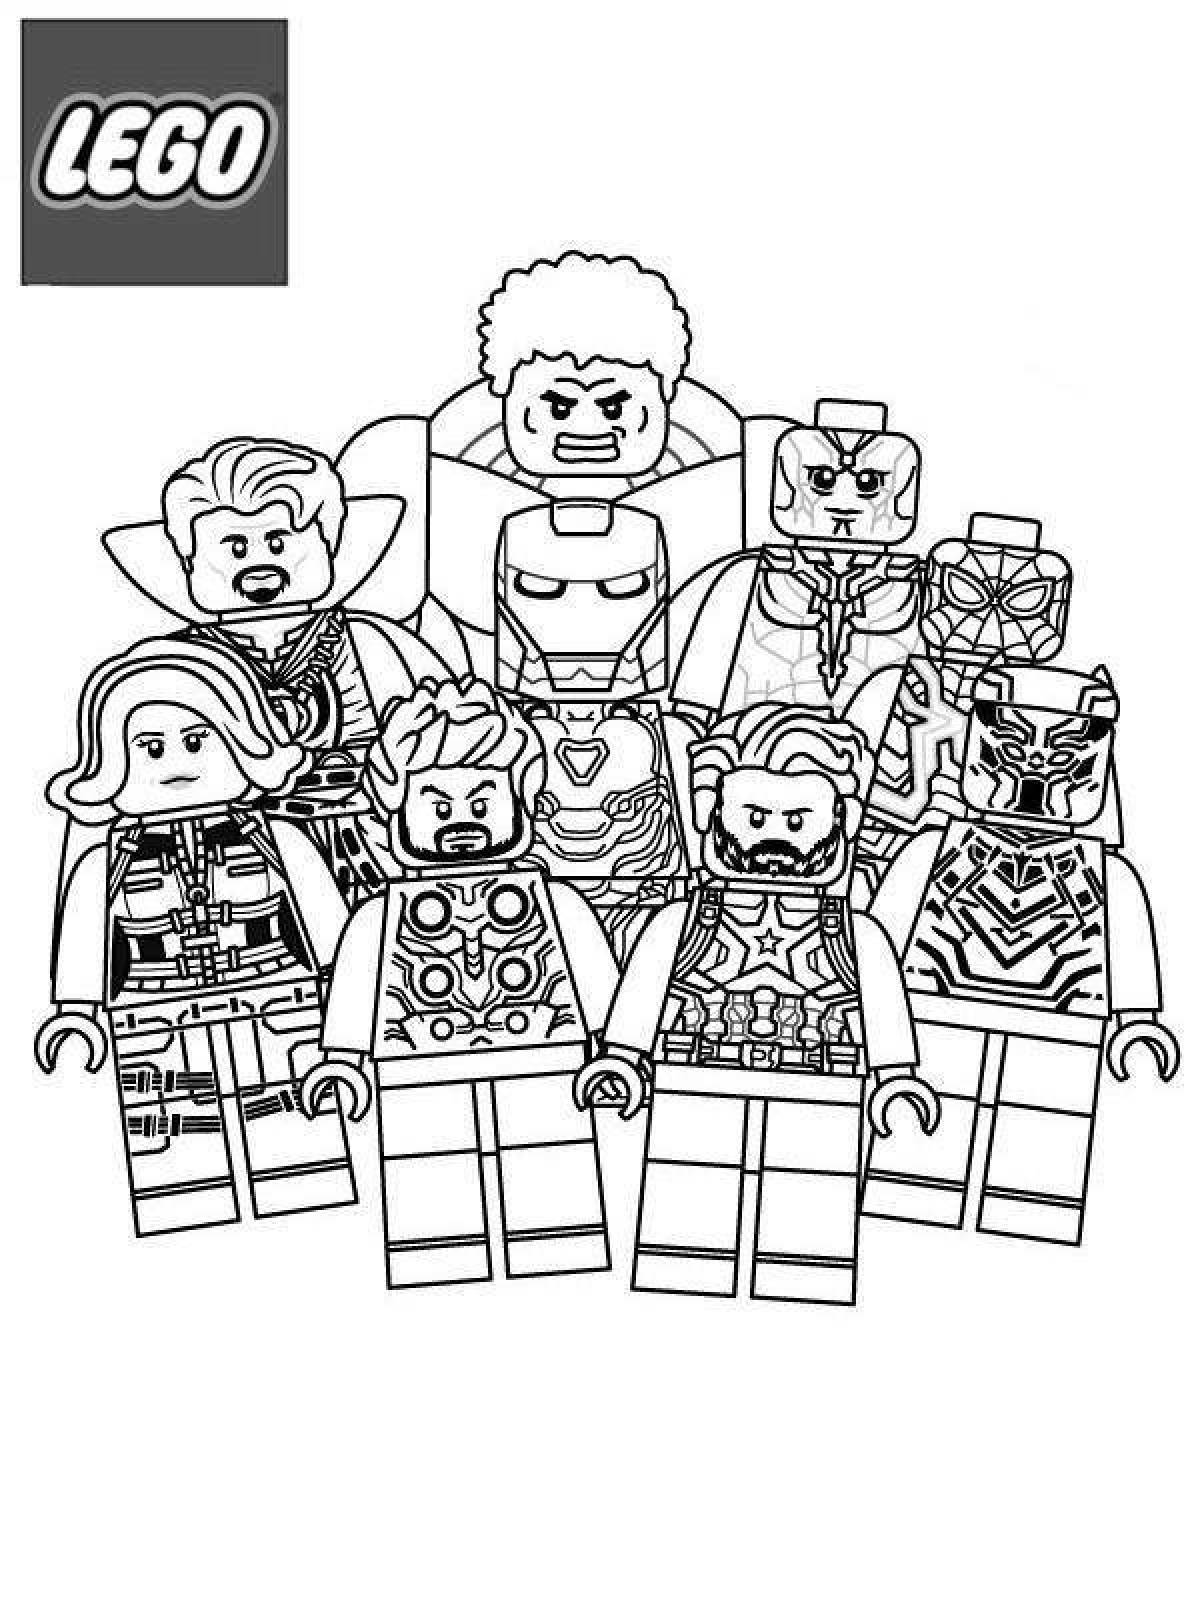 Lego avengers animated coloring book